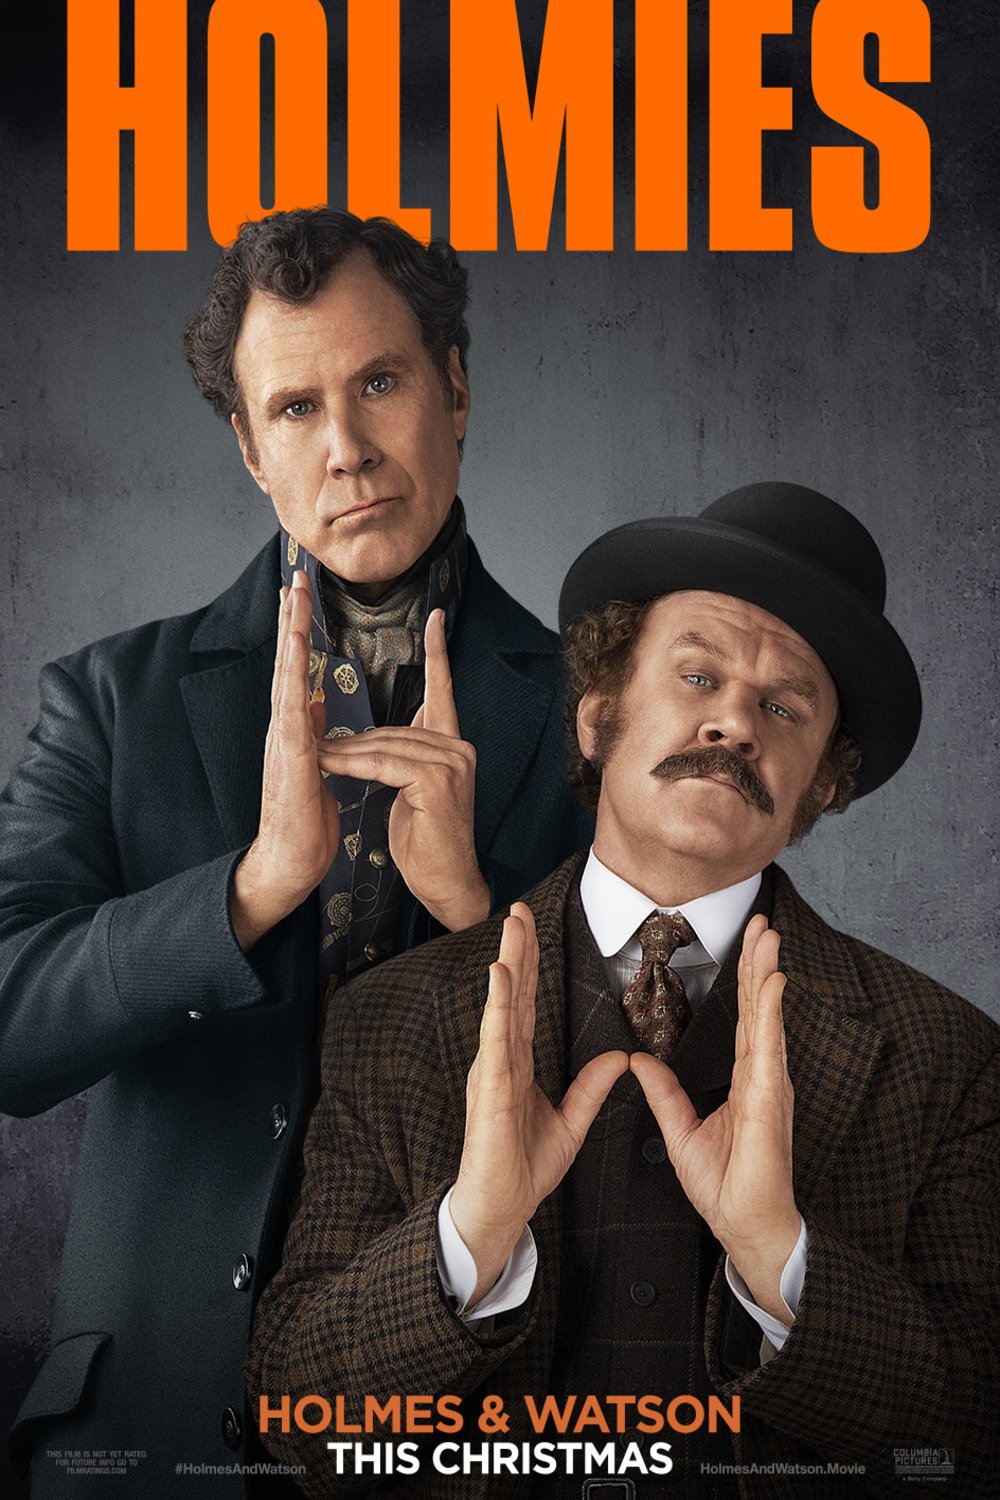 Poster of the movie Holmes et Watson v.f.